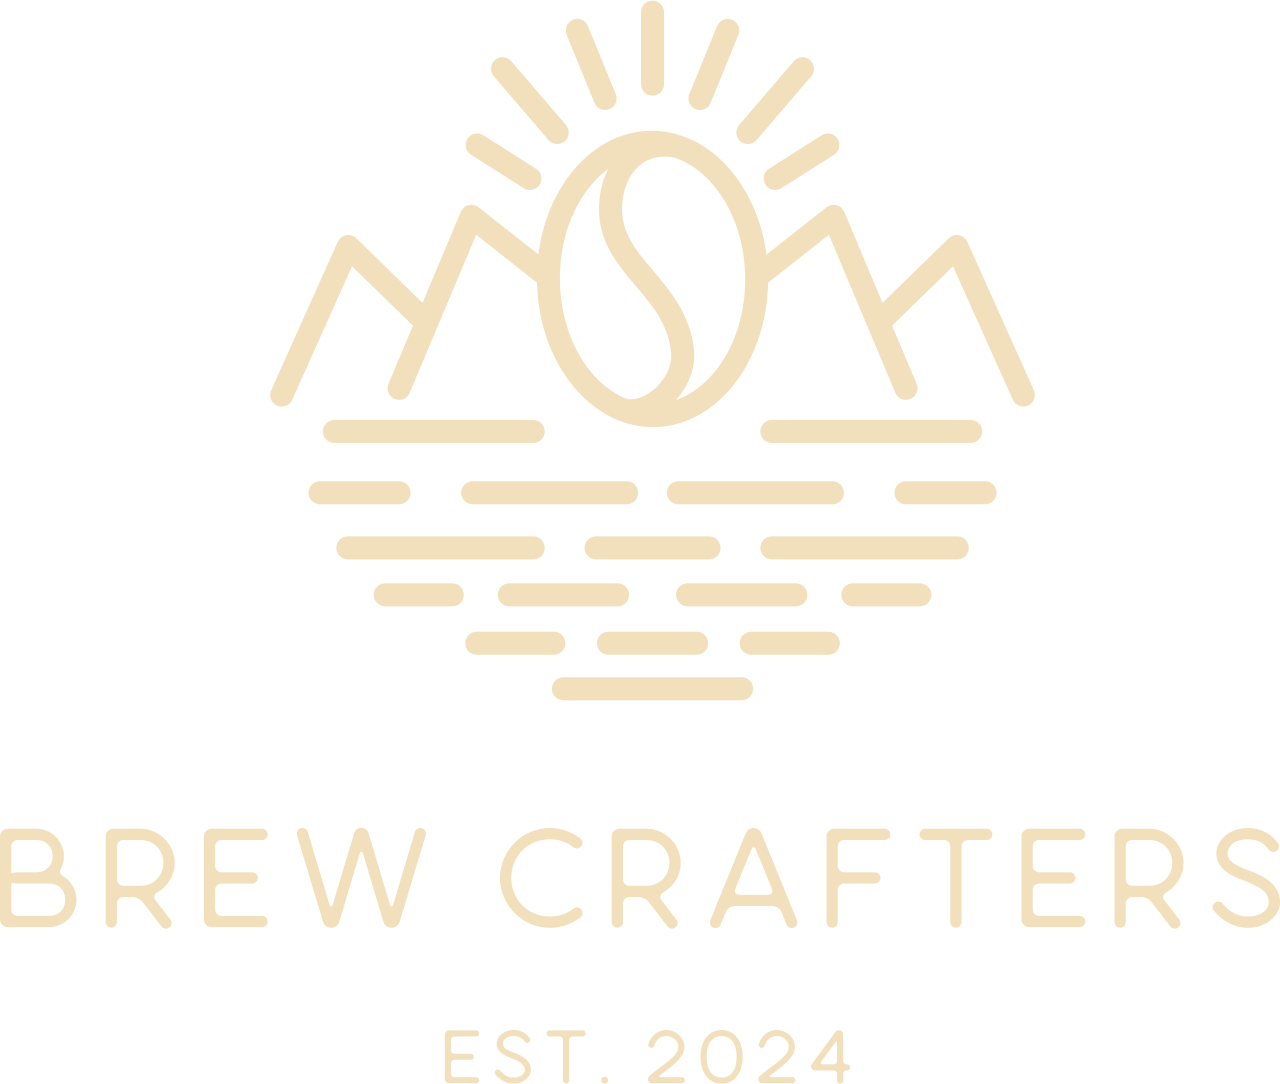 Brew Crafters's logo